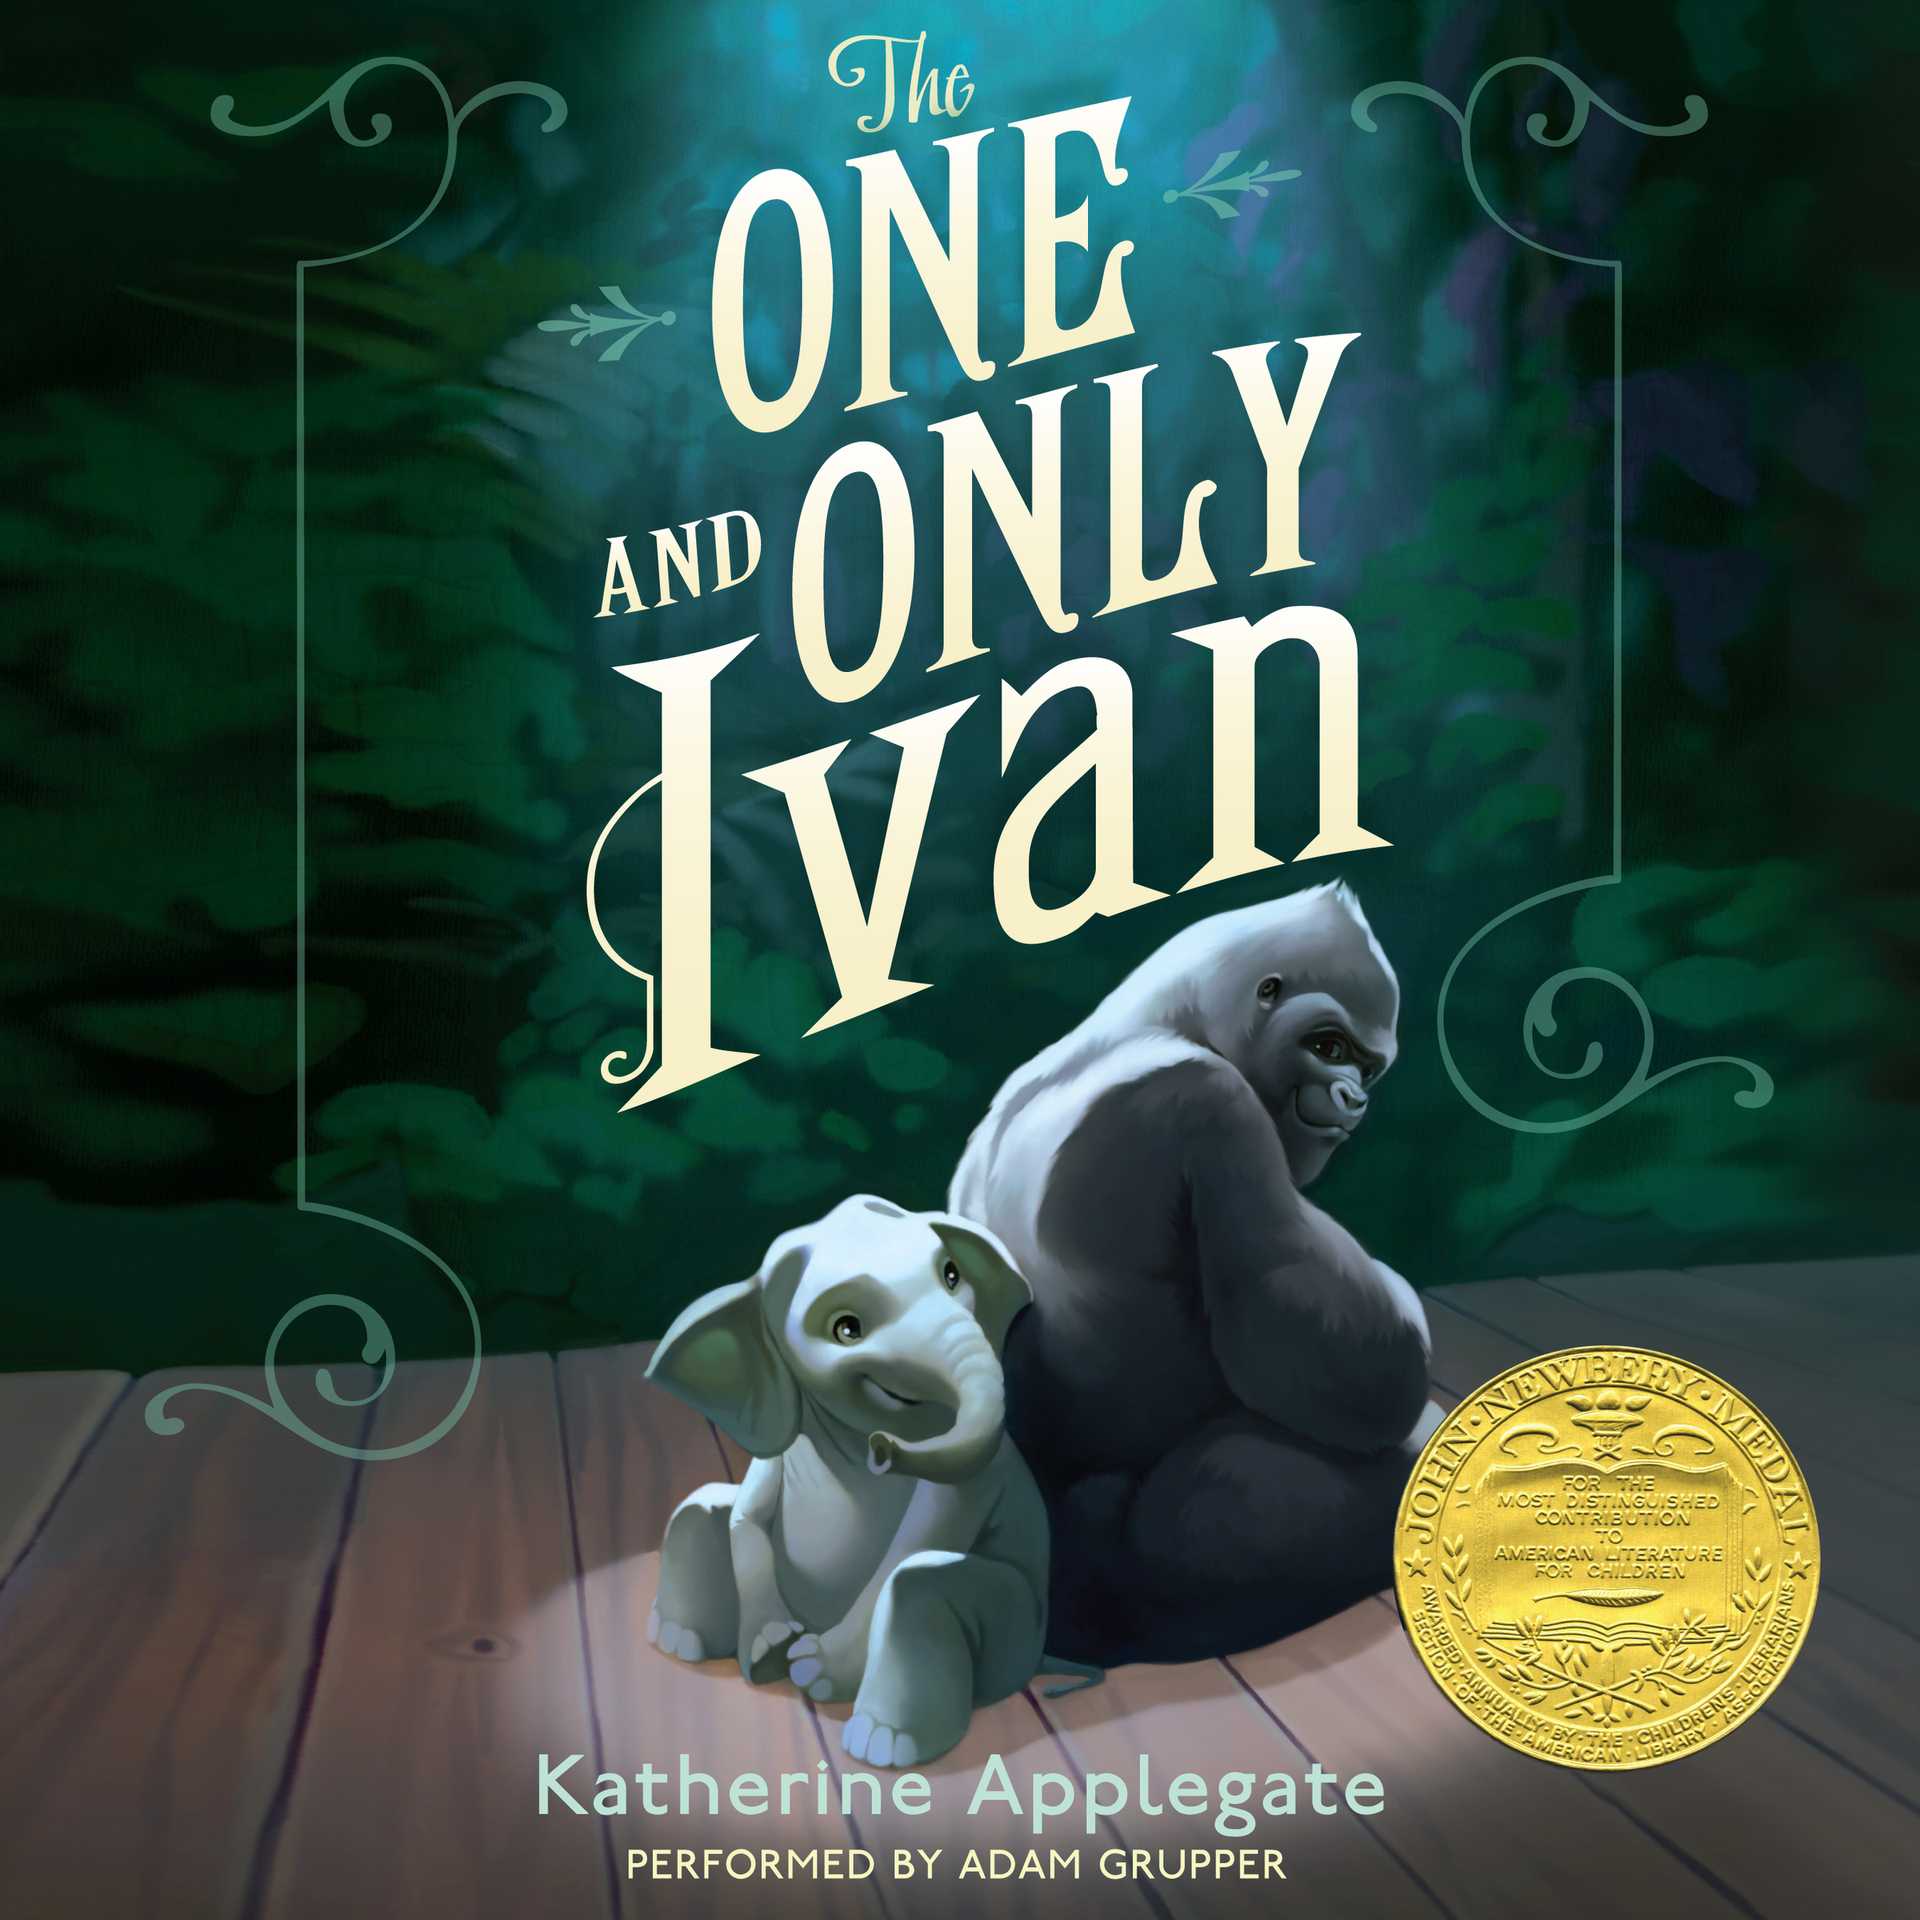 The One and Only Ivan, by Catherine Applegate